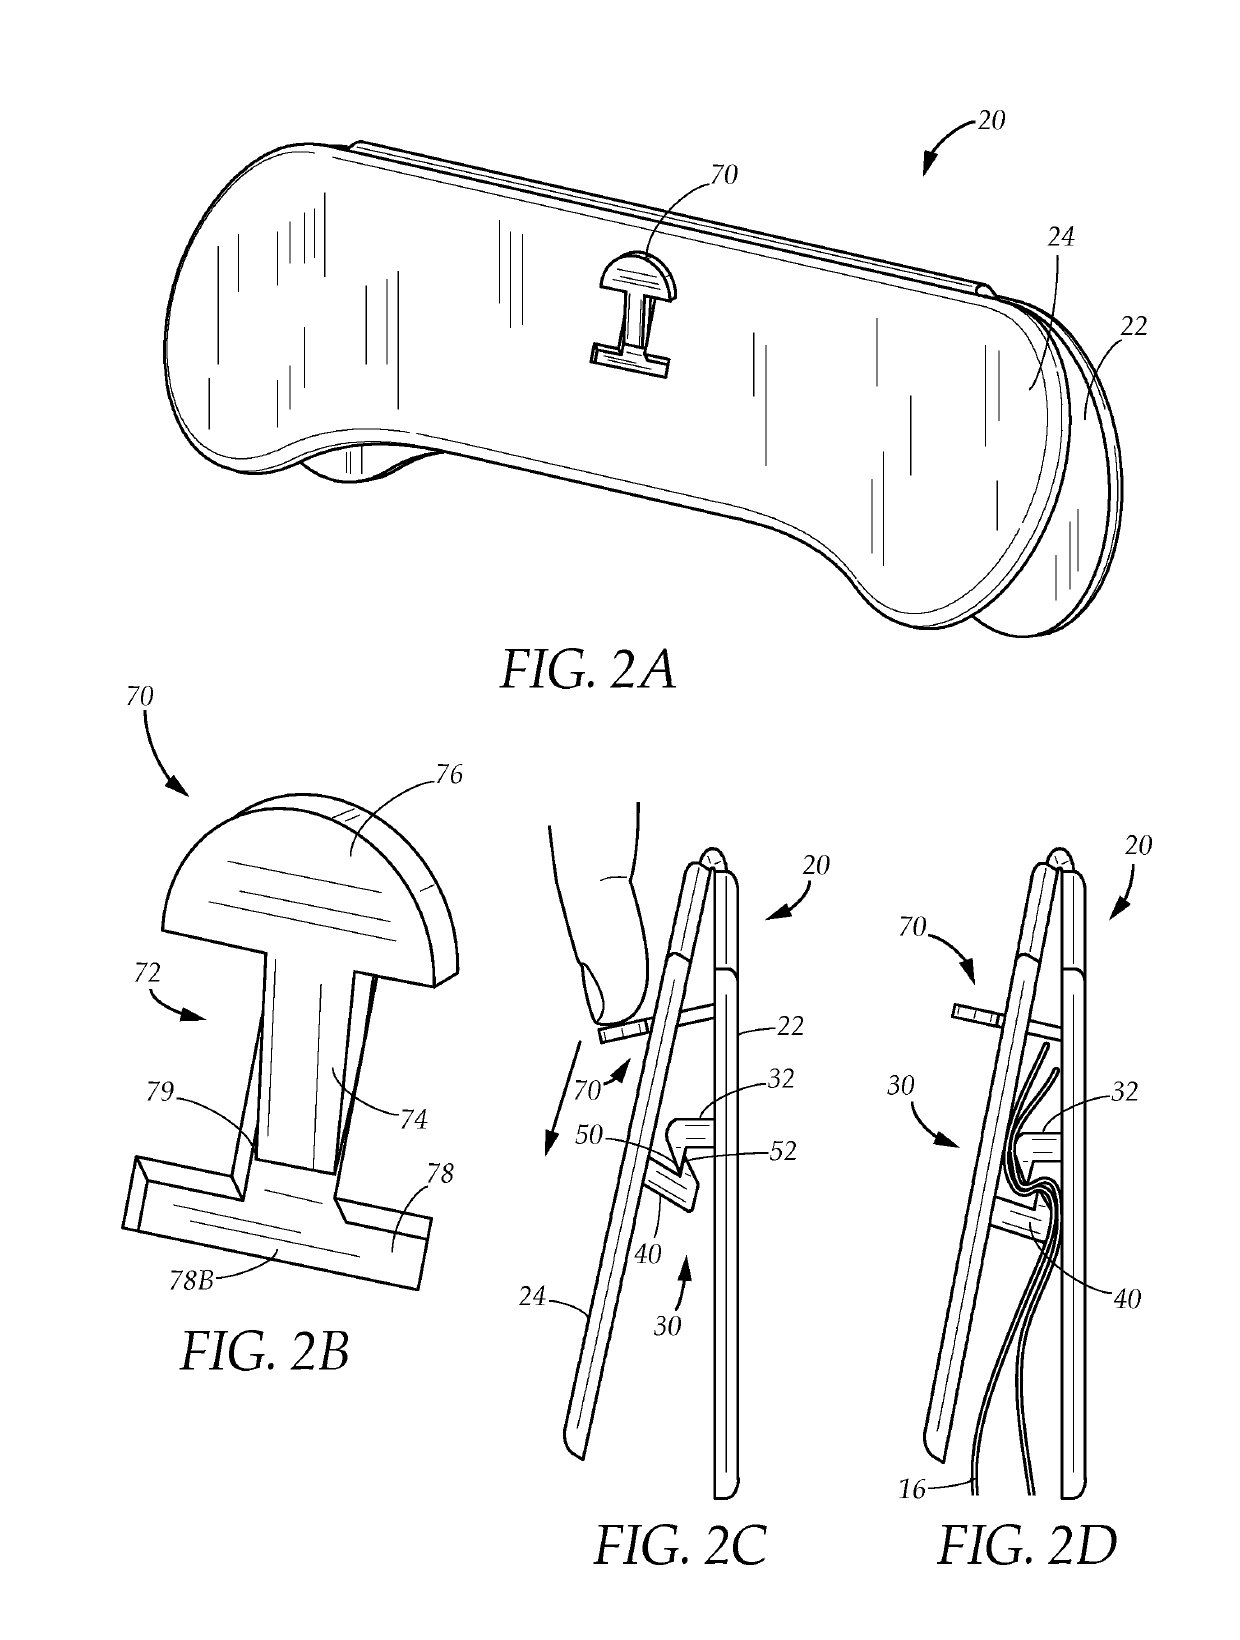 Coupling and uncoupling apparatus with lockable mechanism for bags and packages